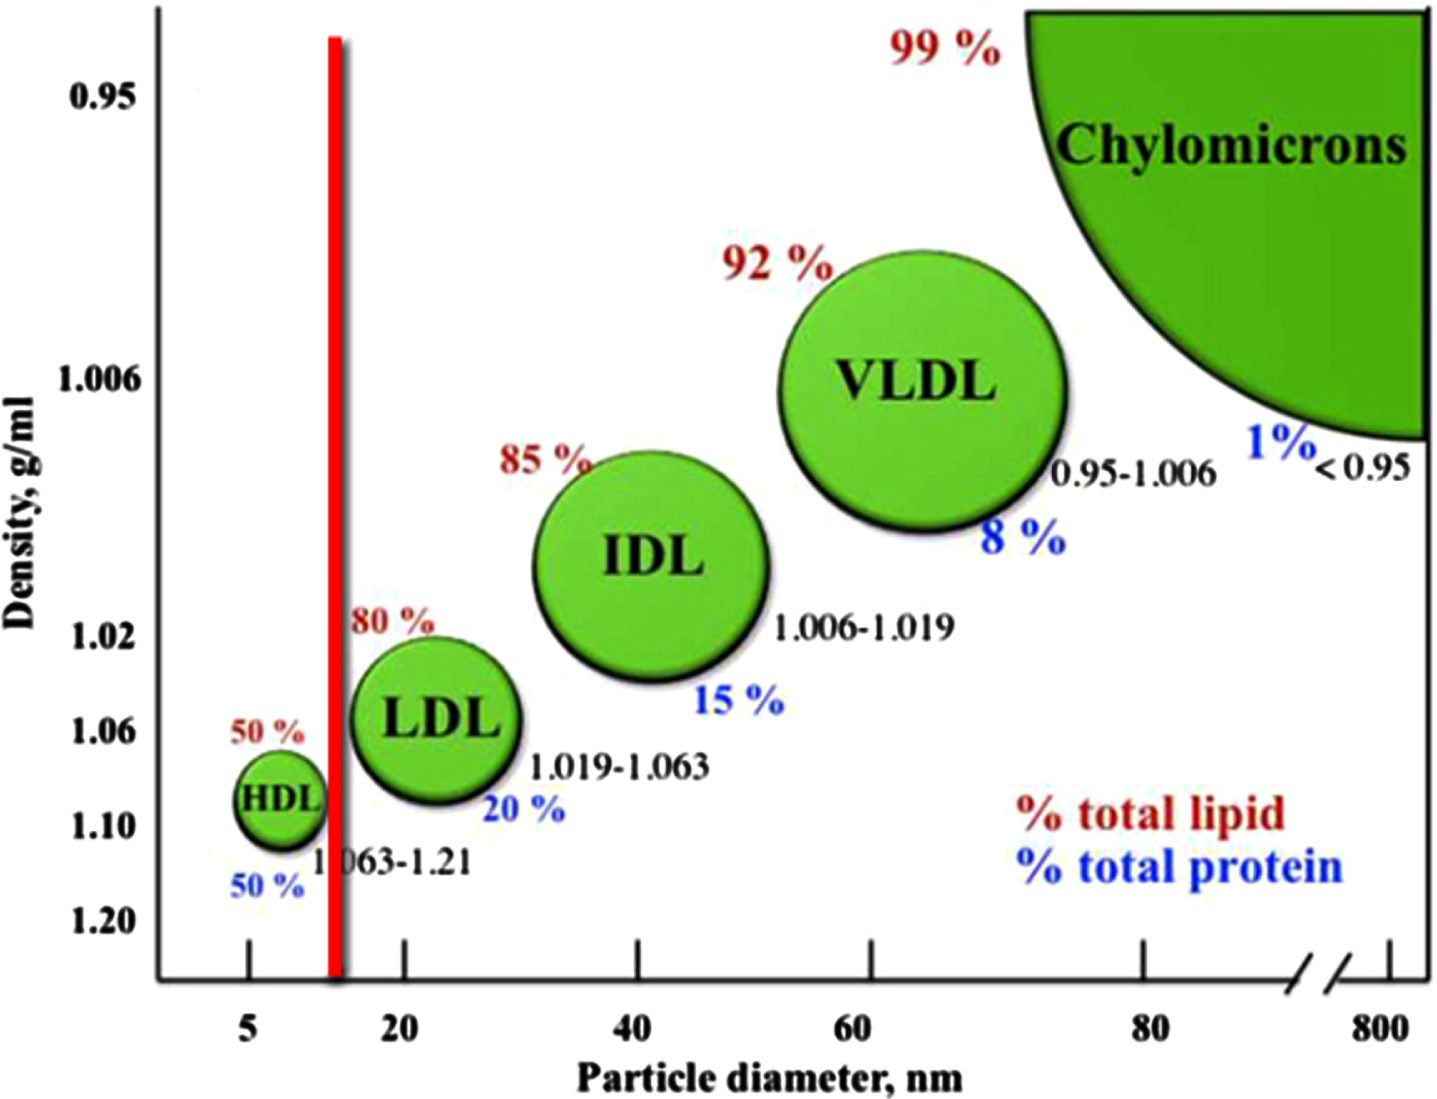 Lipoprotein classes in the bloodstream. The classification of the major types of lipoproteins is based on their densities. The density range for each class is shown, in addition to the lipid (red) and protein (blue) content. The diagram is not to scale. Image source: [56]; licensed under CC BY 3.0, with modifications by Jonathan Rudge.